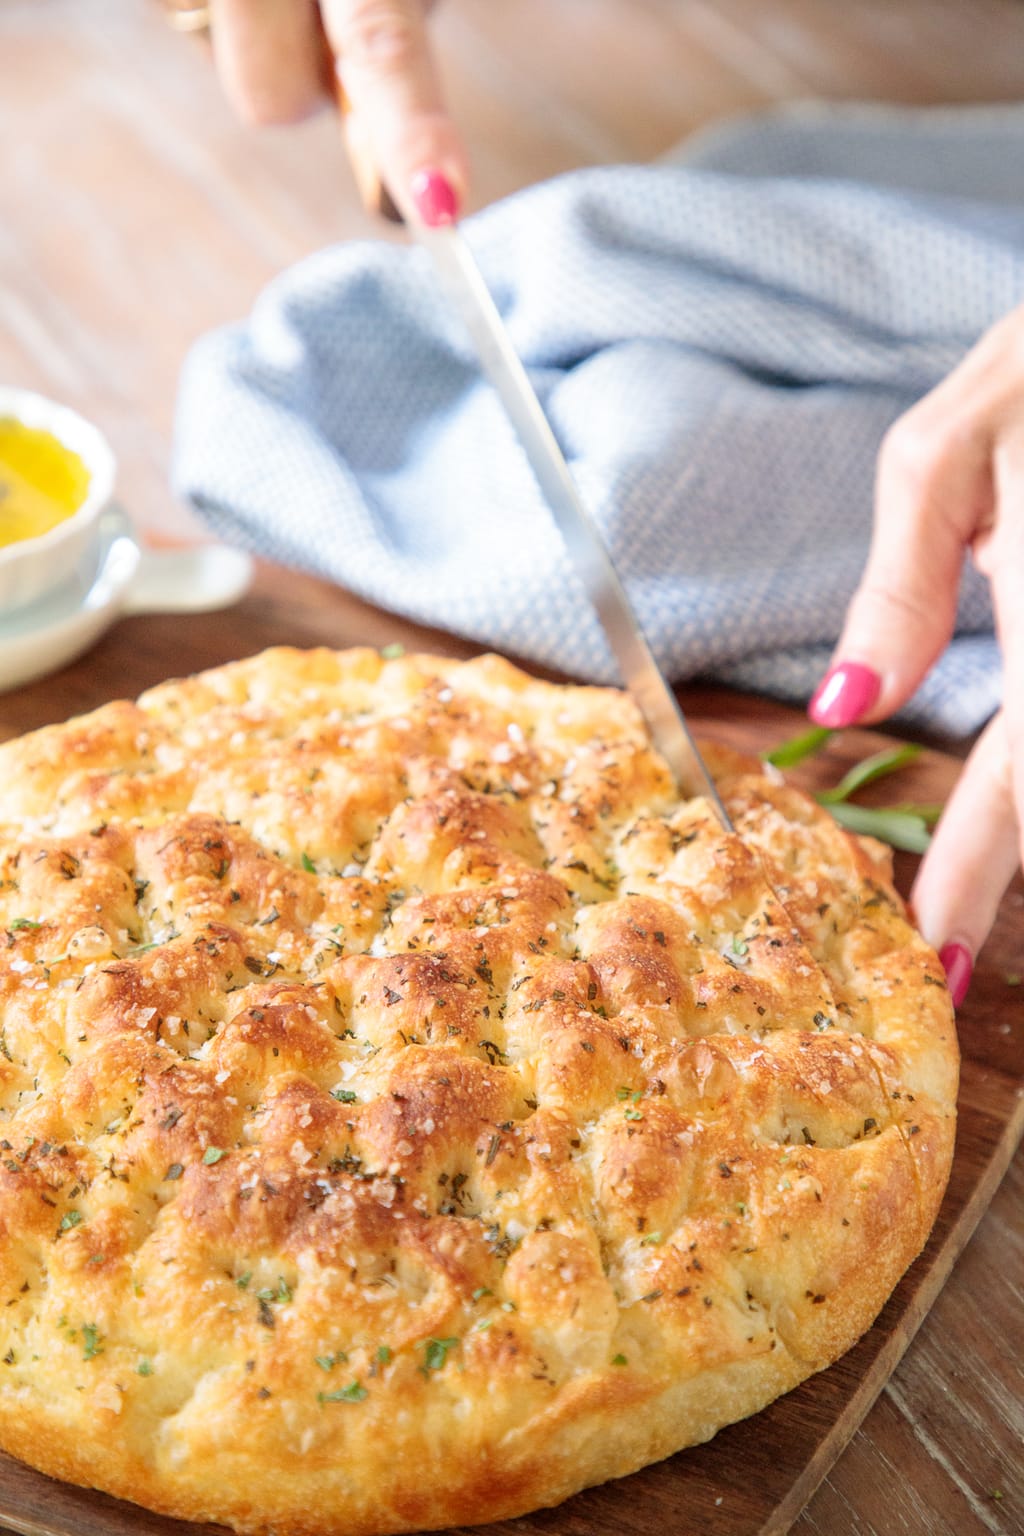 Vertical closeup photo of a person slicing a piece of Ridiculously Easy Focaccia Bread on a wood table.